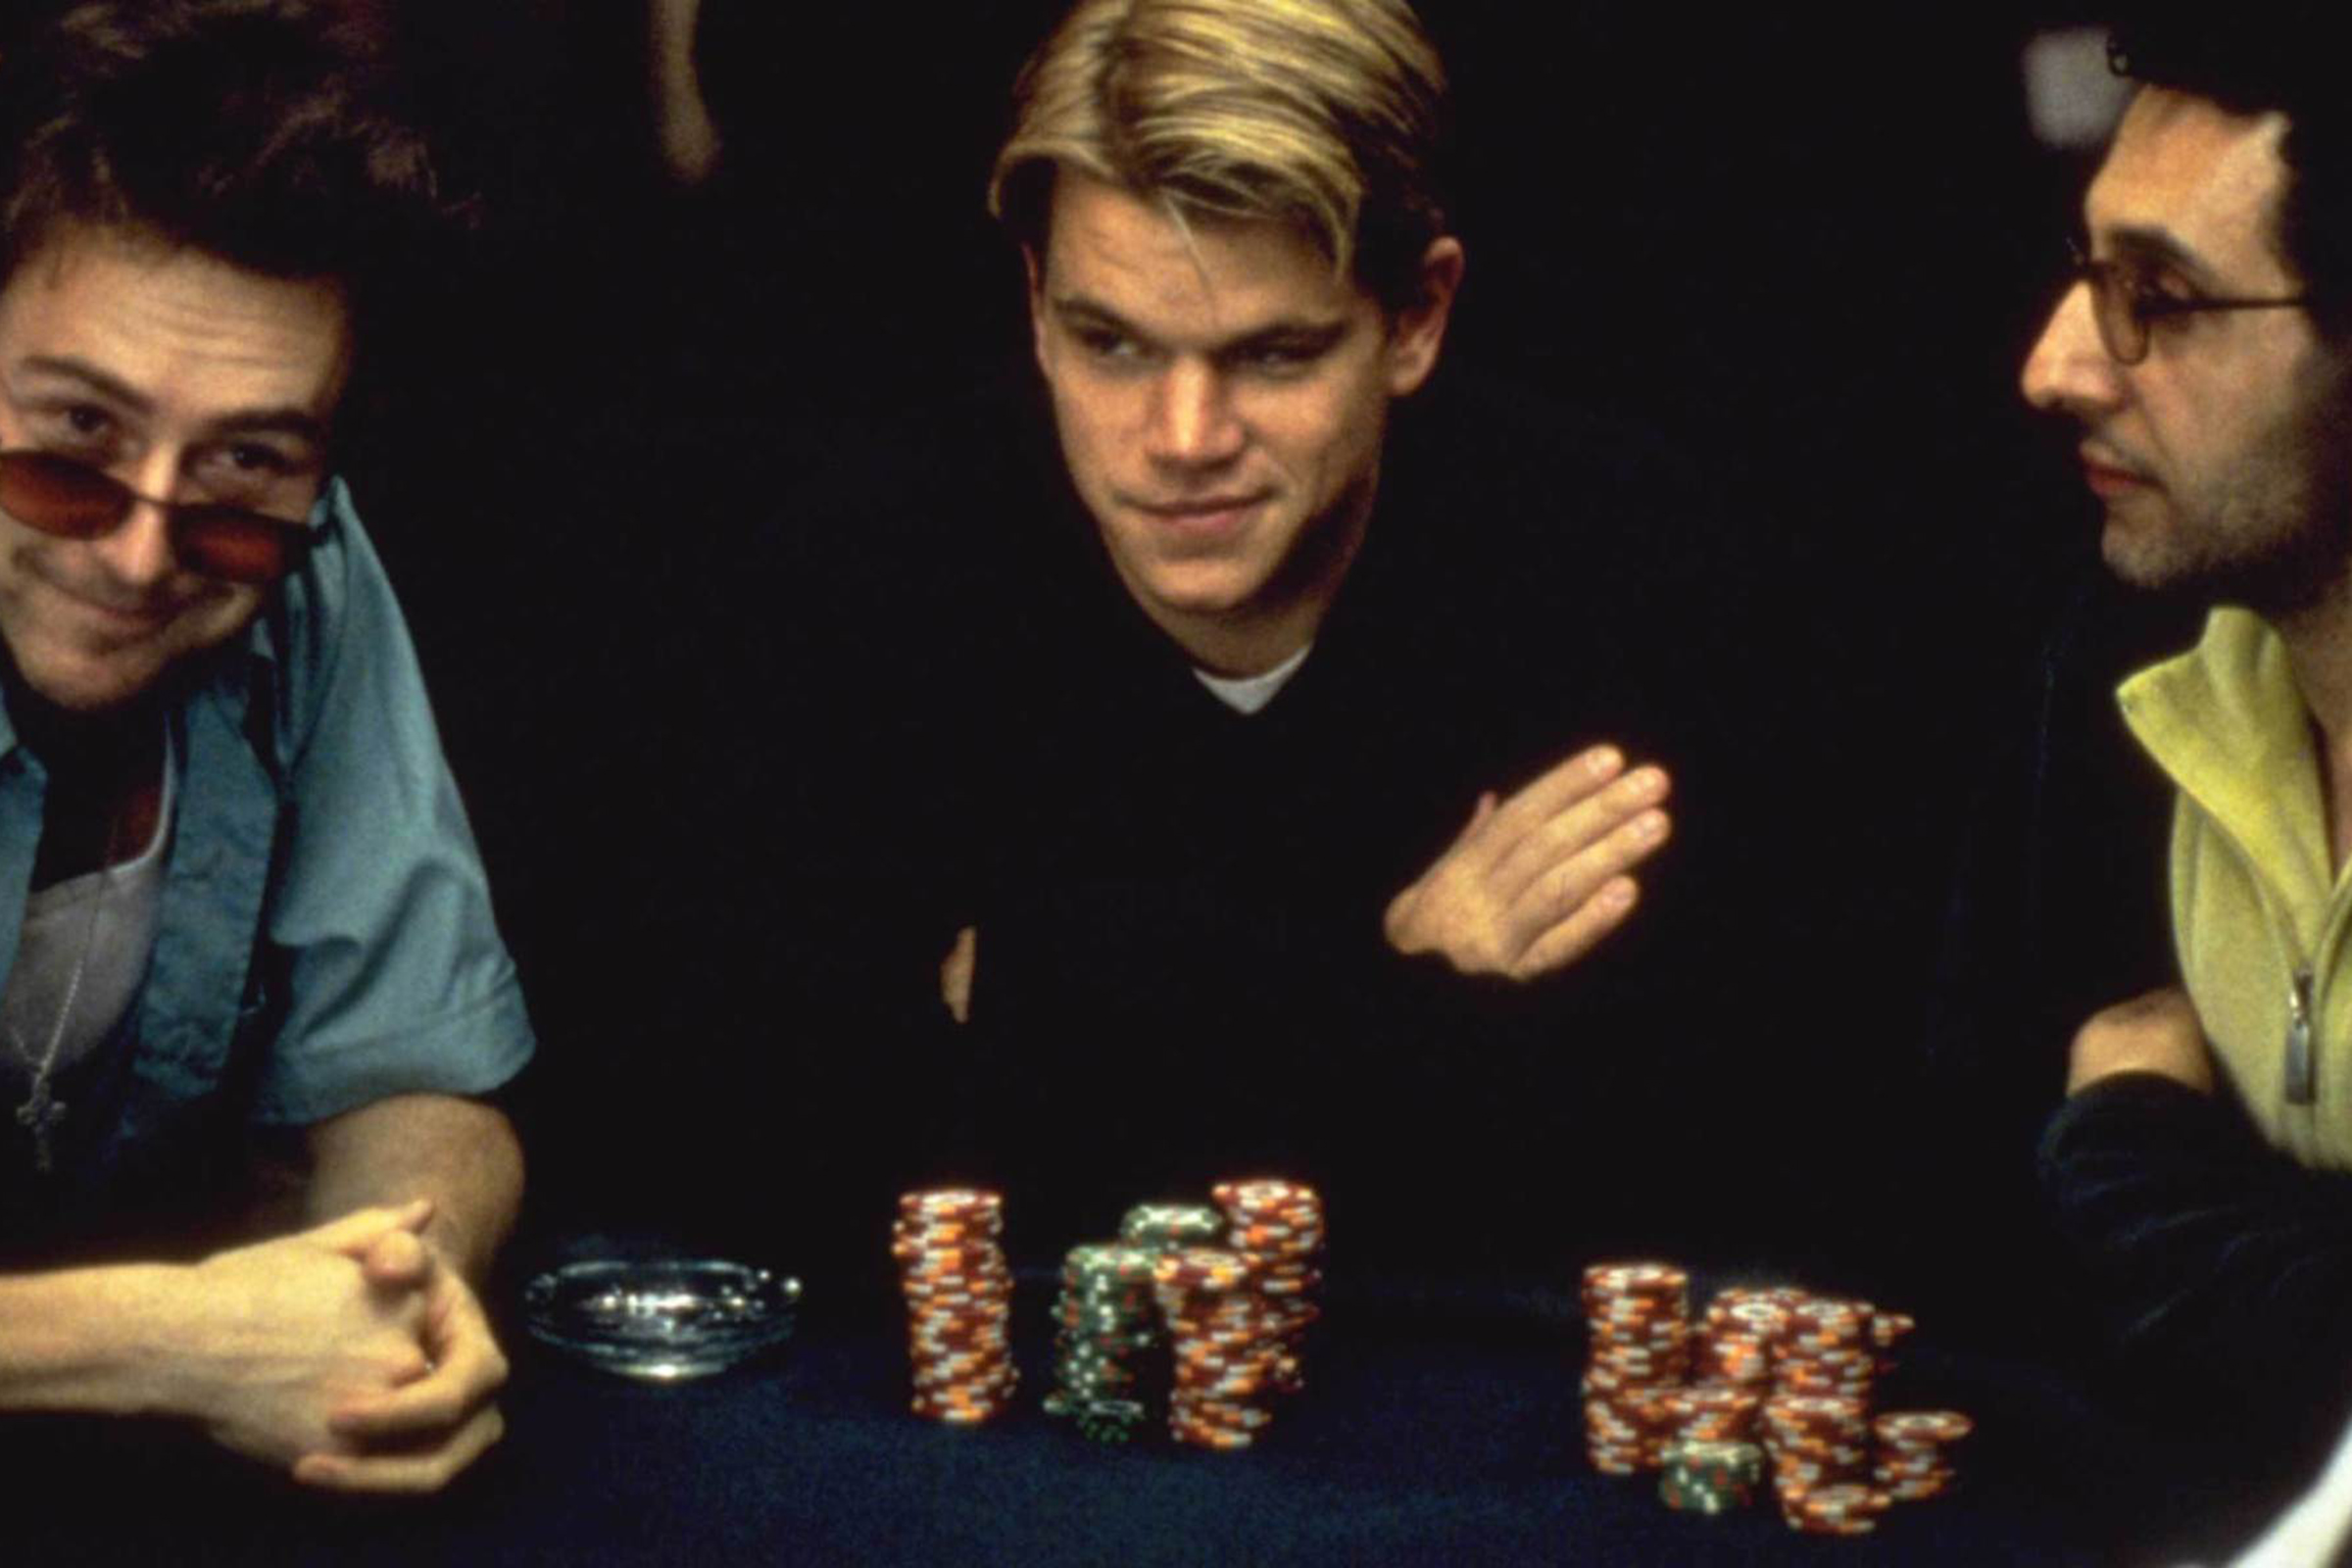 Rounders Sequel Would Be Just What the Poker Doctor Ordered